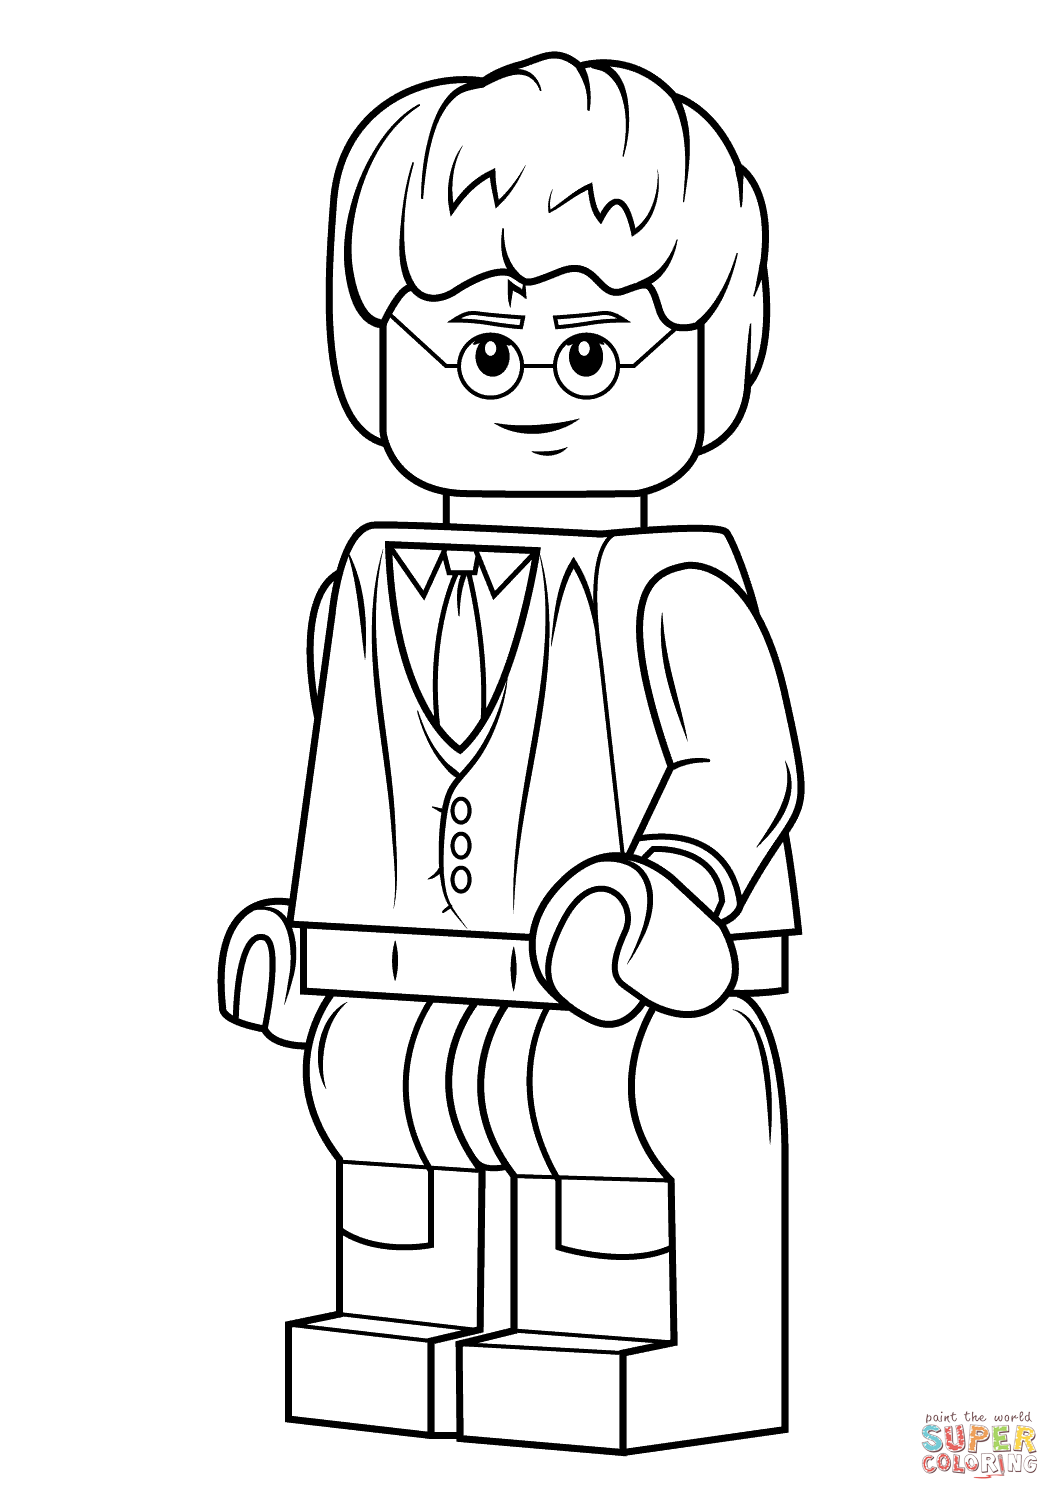 Lego Harry Potter coloring page | Free Printable Coloring Pages